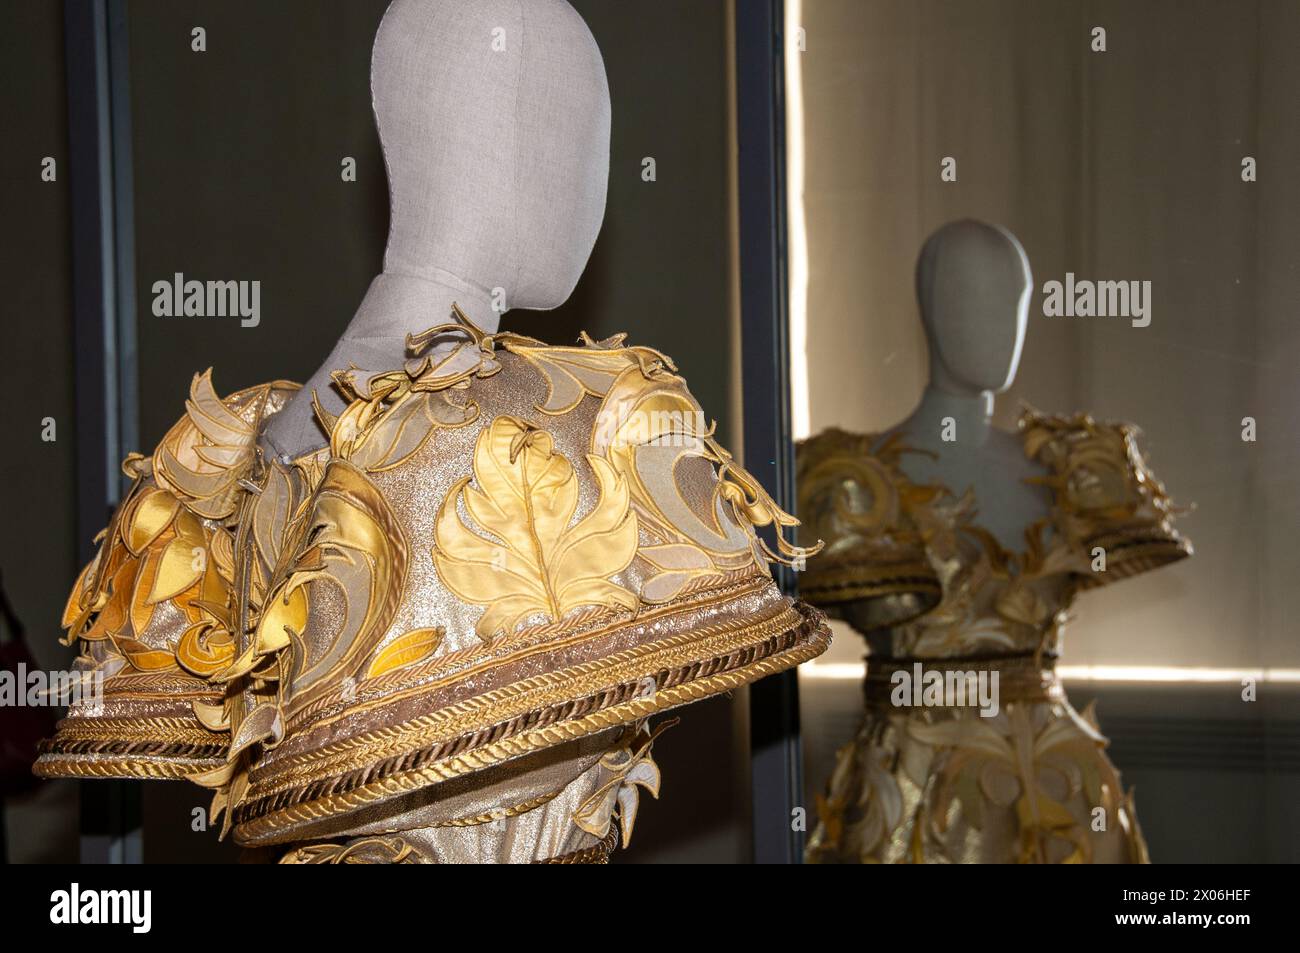 A detail of one of Roberto Capucci's high fashion creations on display at the Venaria Reale Stock Photo